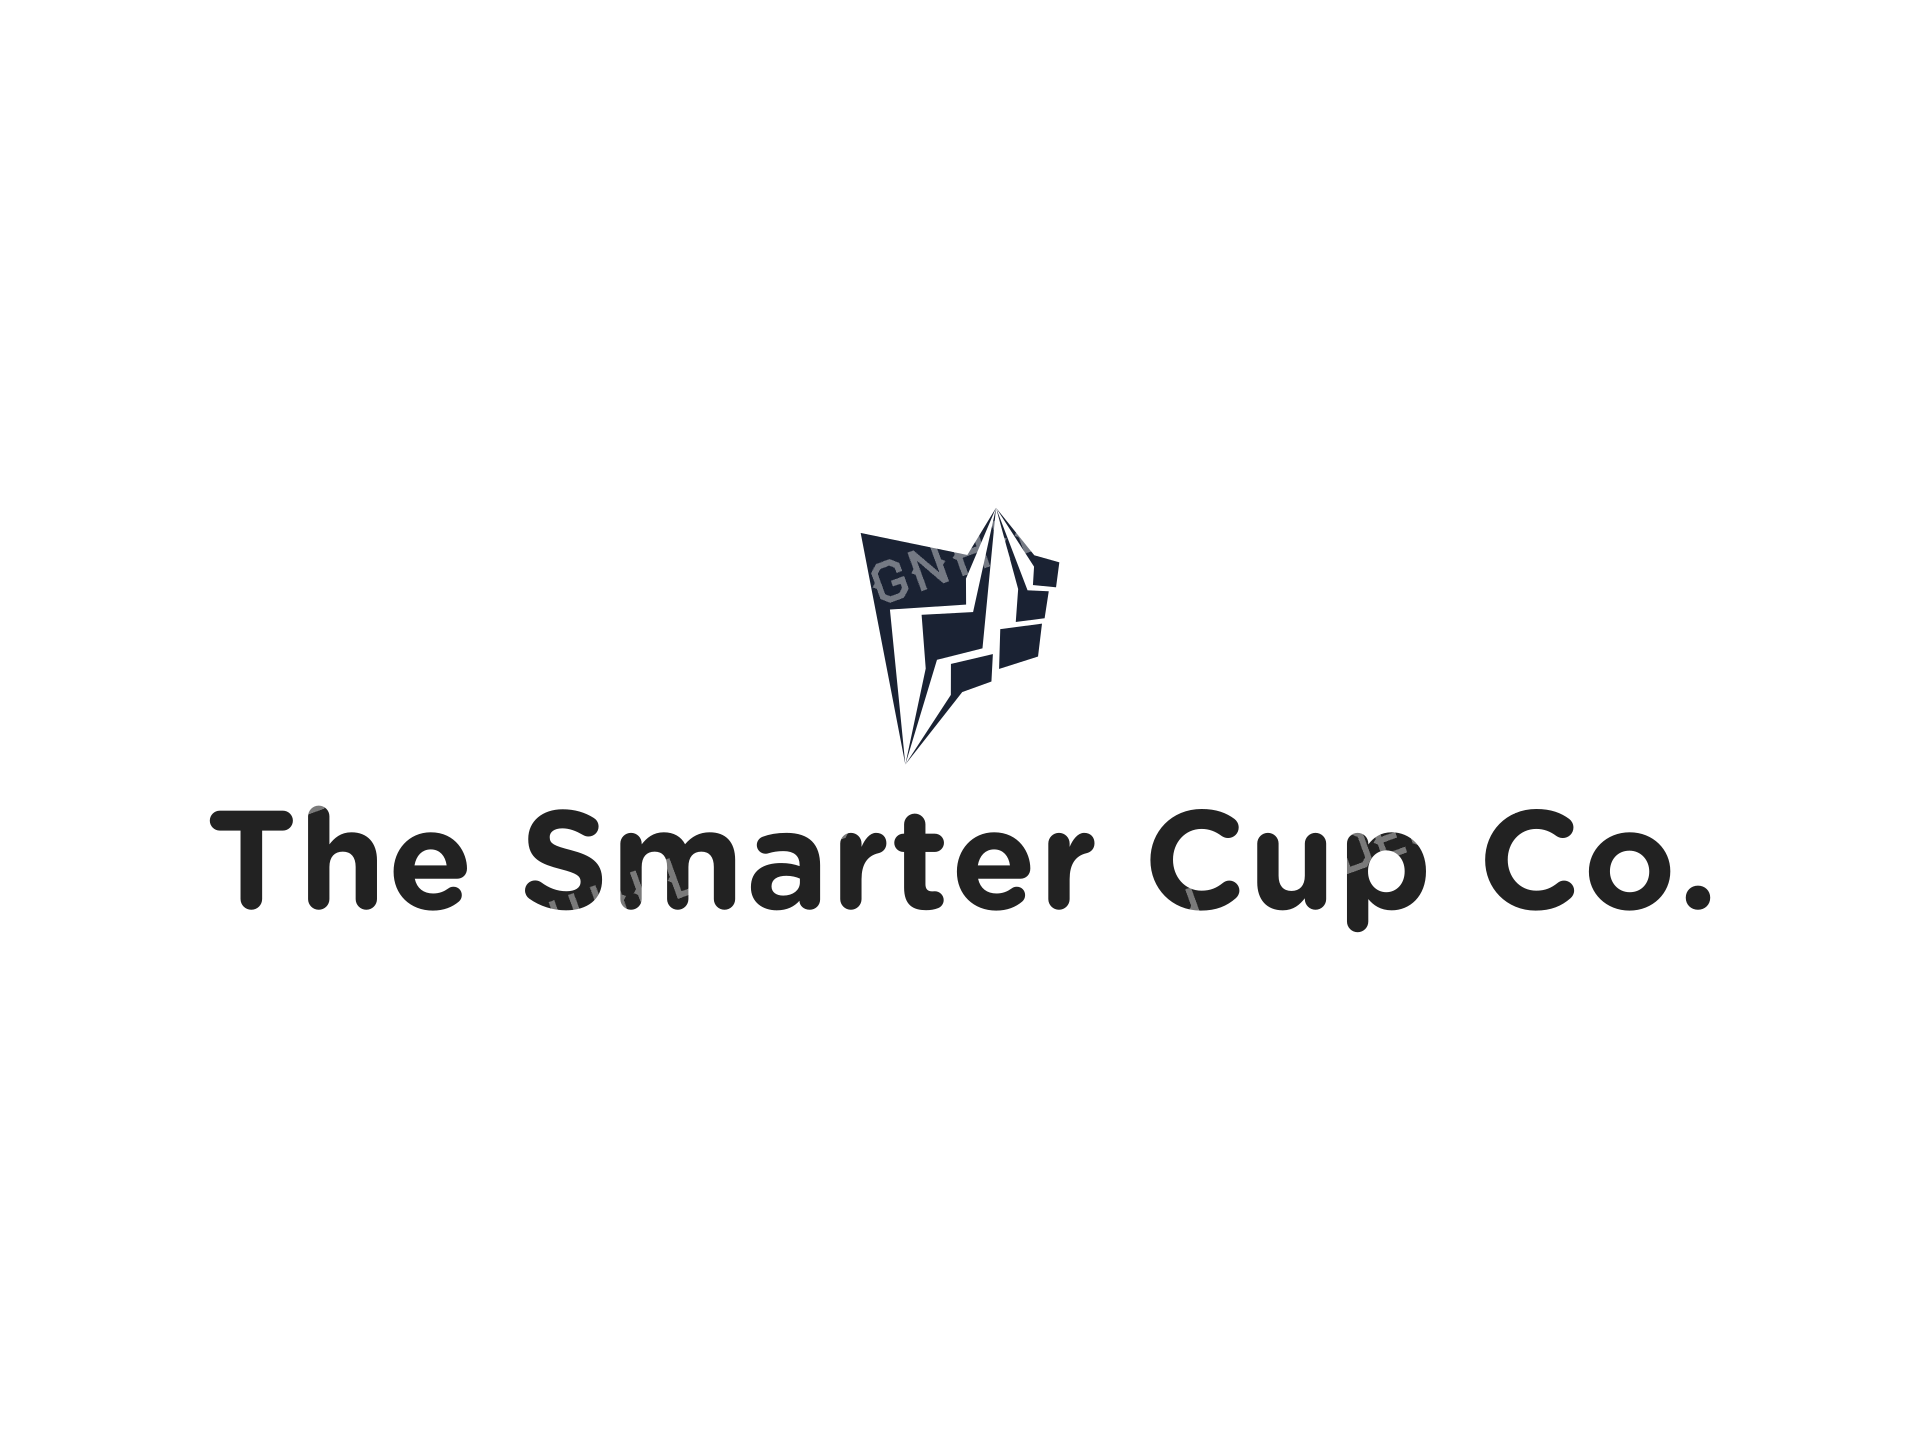 The Smarter Cup